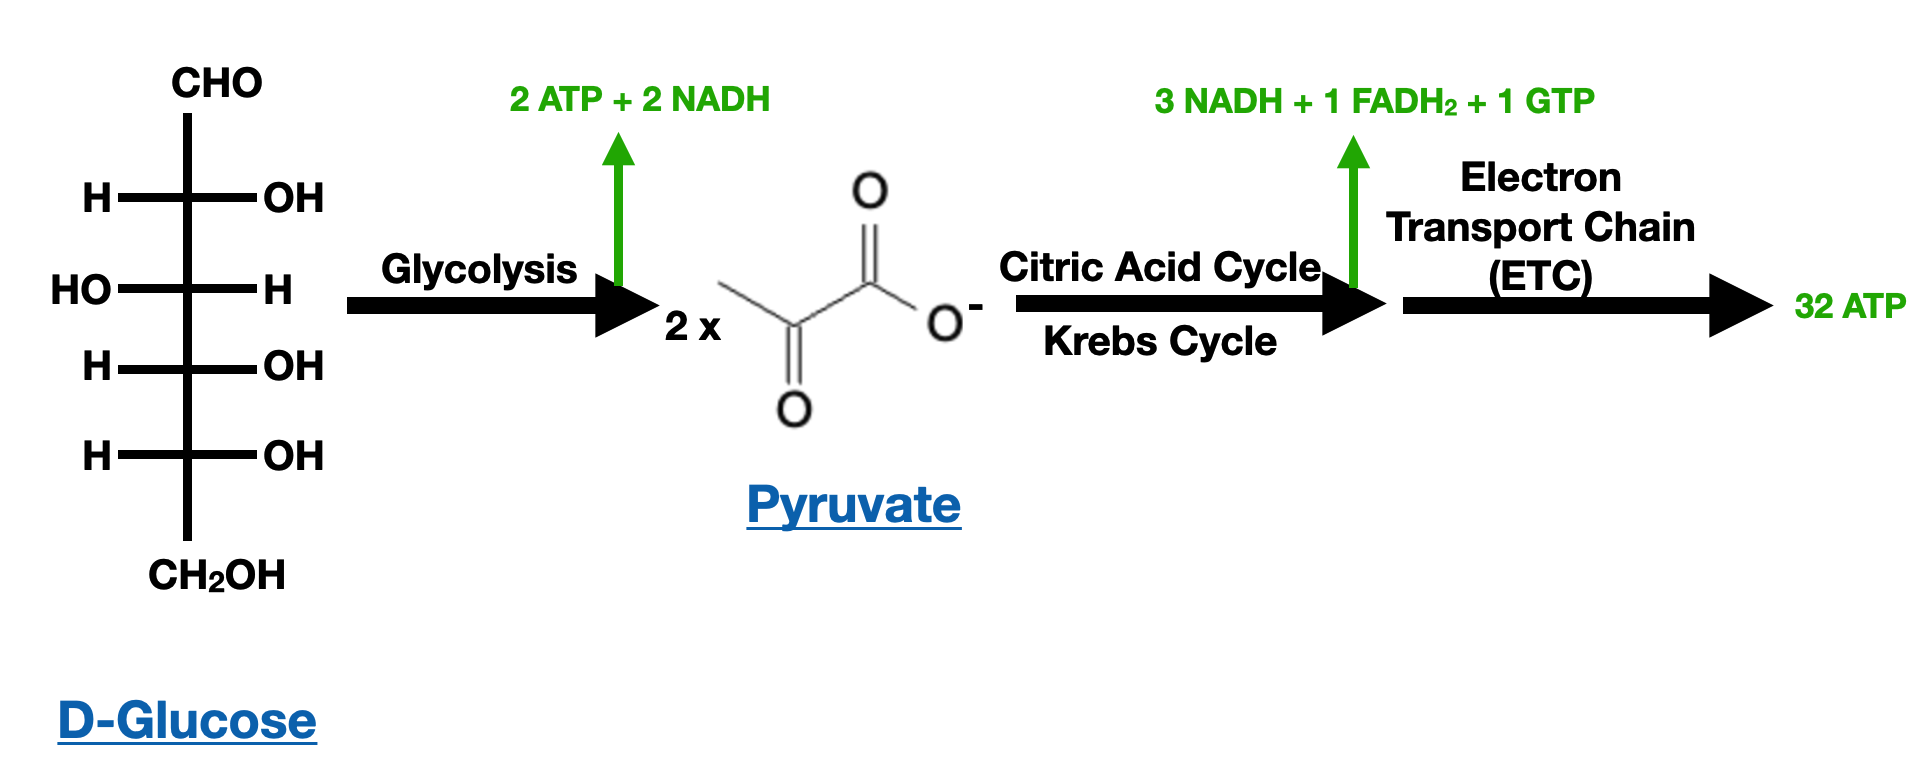 Introduction to Carbohydrates - glucose atp generation overview